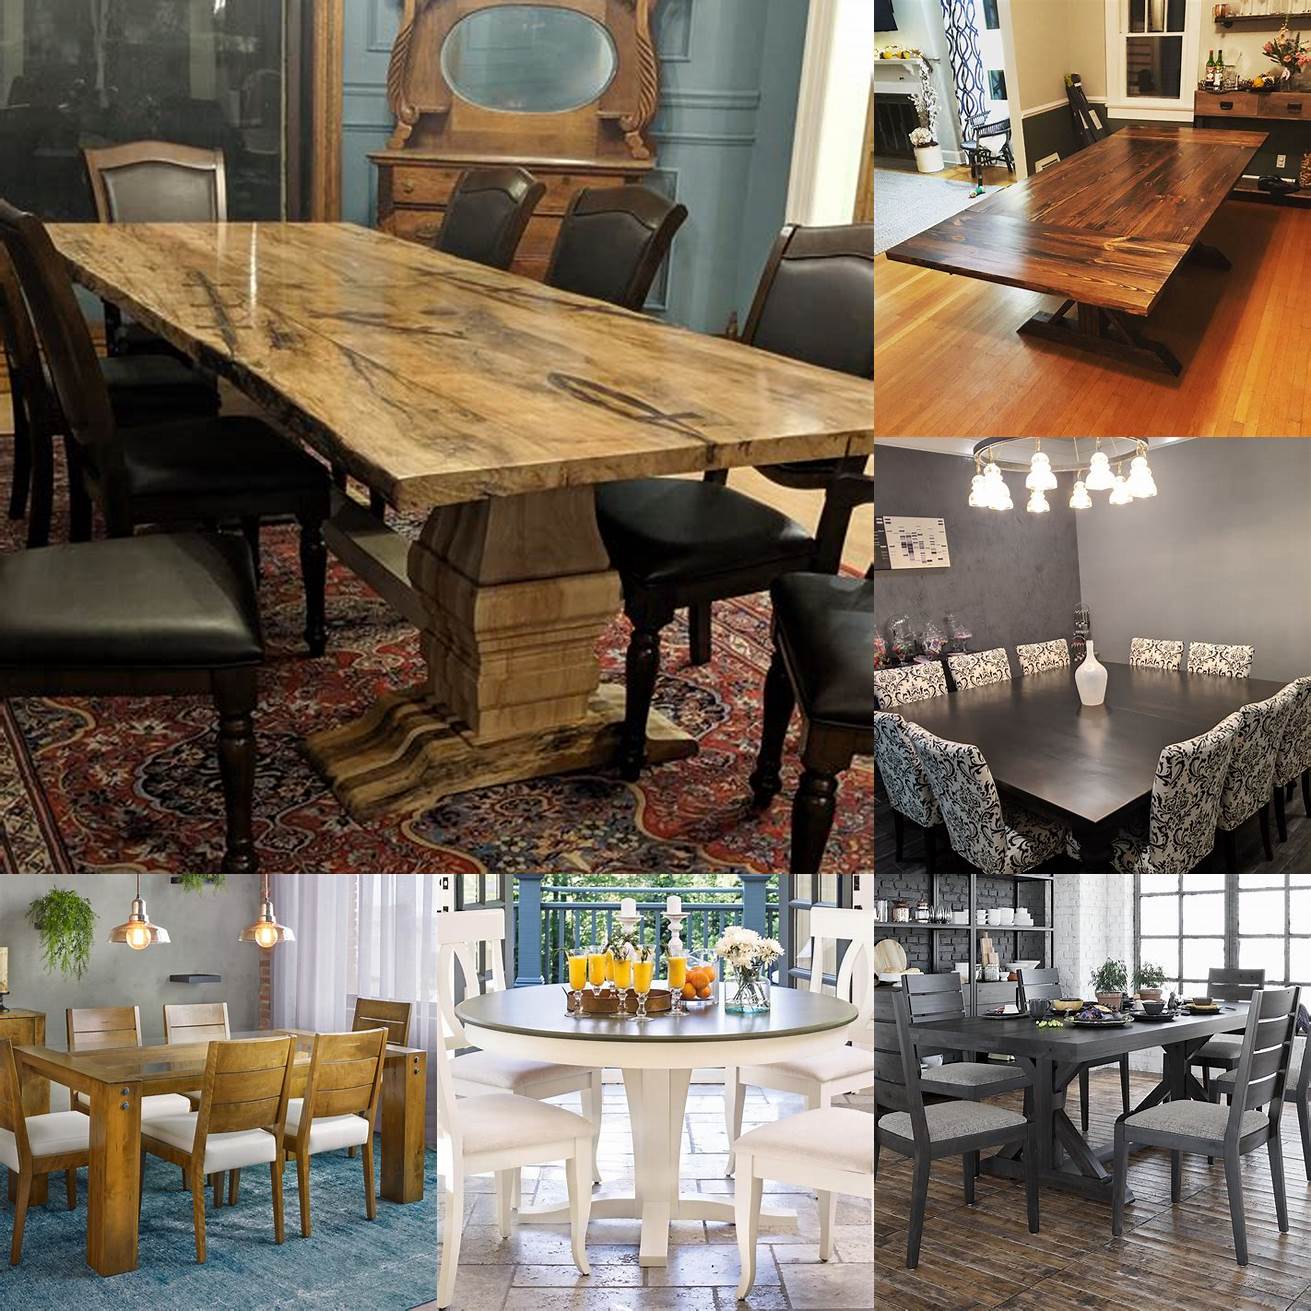 A custom dining table can be designed to fit your space and your style providing a beautiful and functional centerpiece for your home